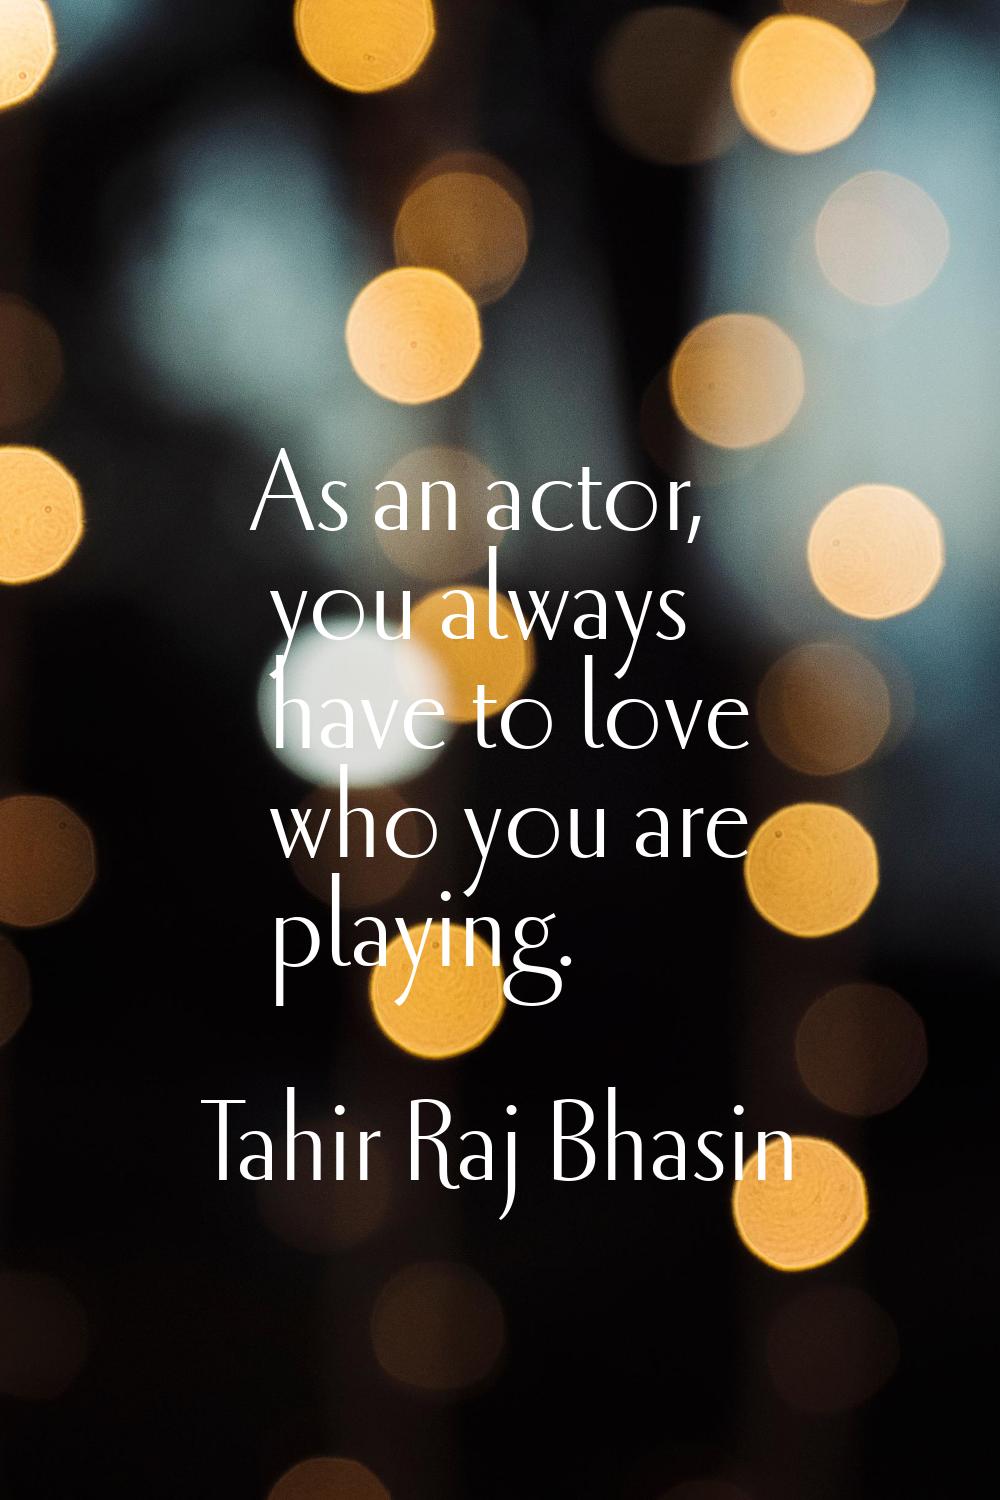 As an actor, you always have to love who you are playing.